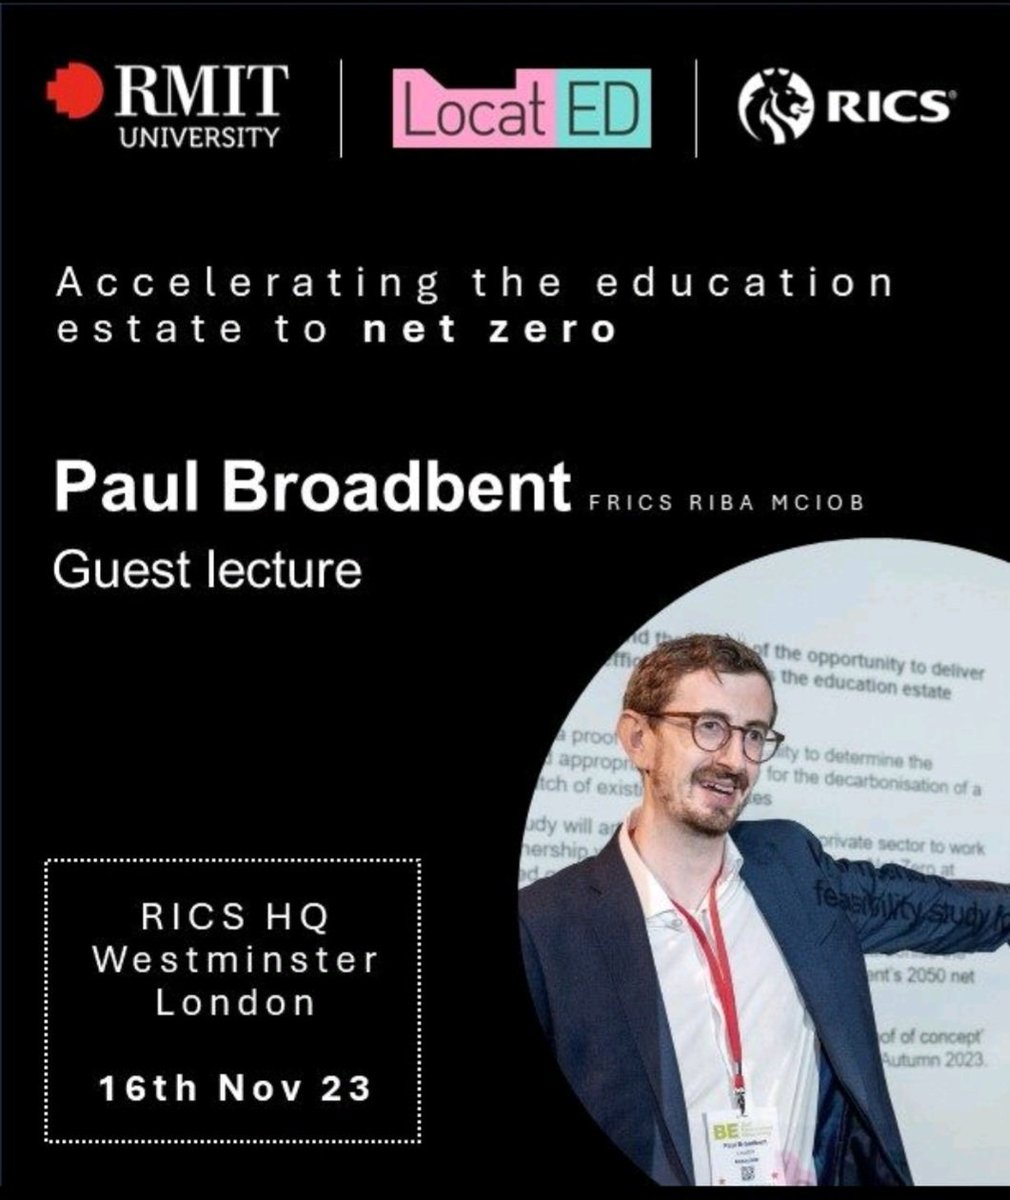 🌍 Excited to confirm that I will be delivering a lecture to @RMIT University School of Property, Construction and Project Management in Melbourne at London RICS HQ on Thursday 16th of November! 

#netzeroschools #netzeroeducation #letsgozero 🌿🌱🌎